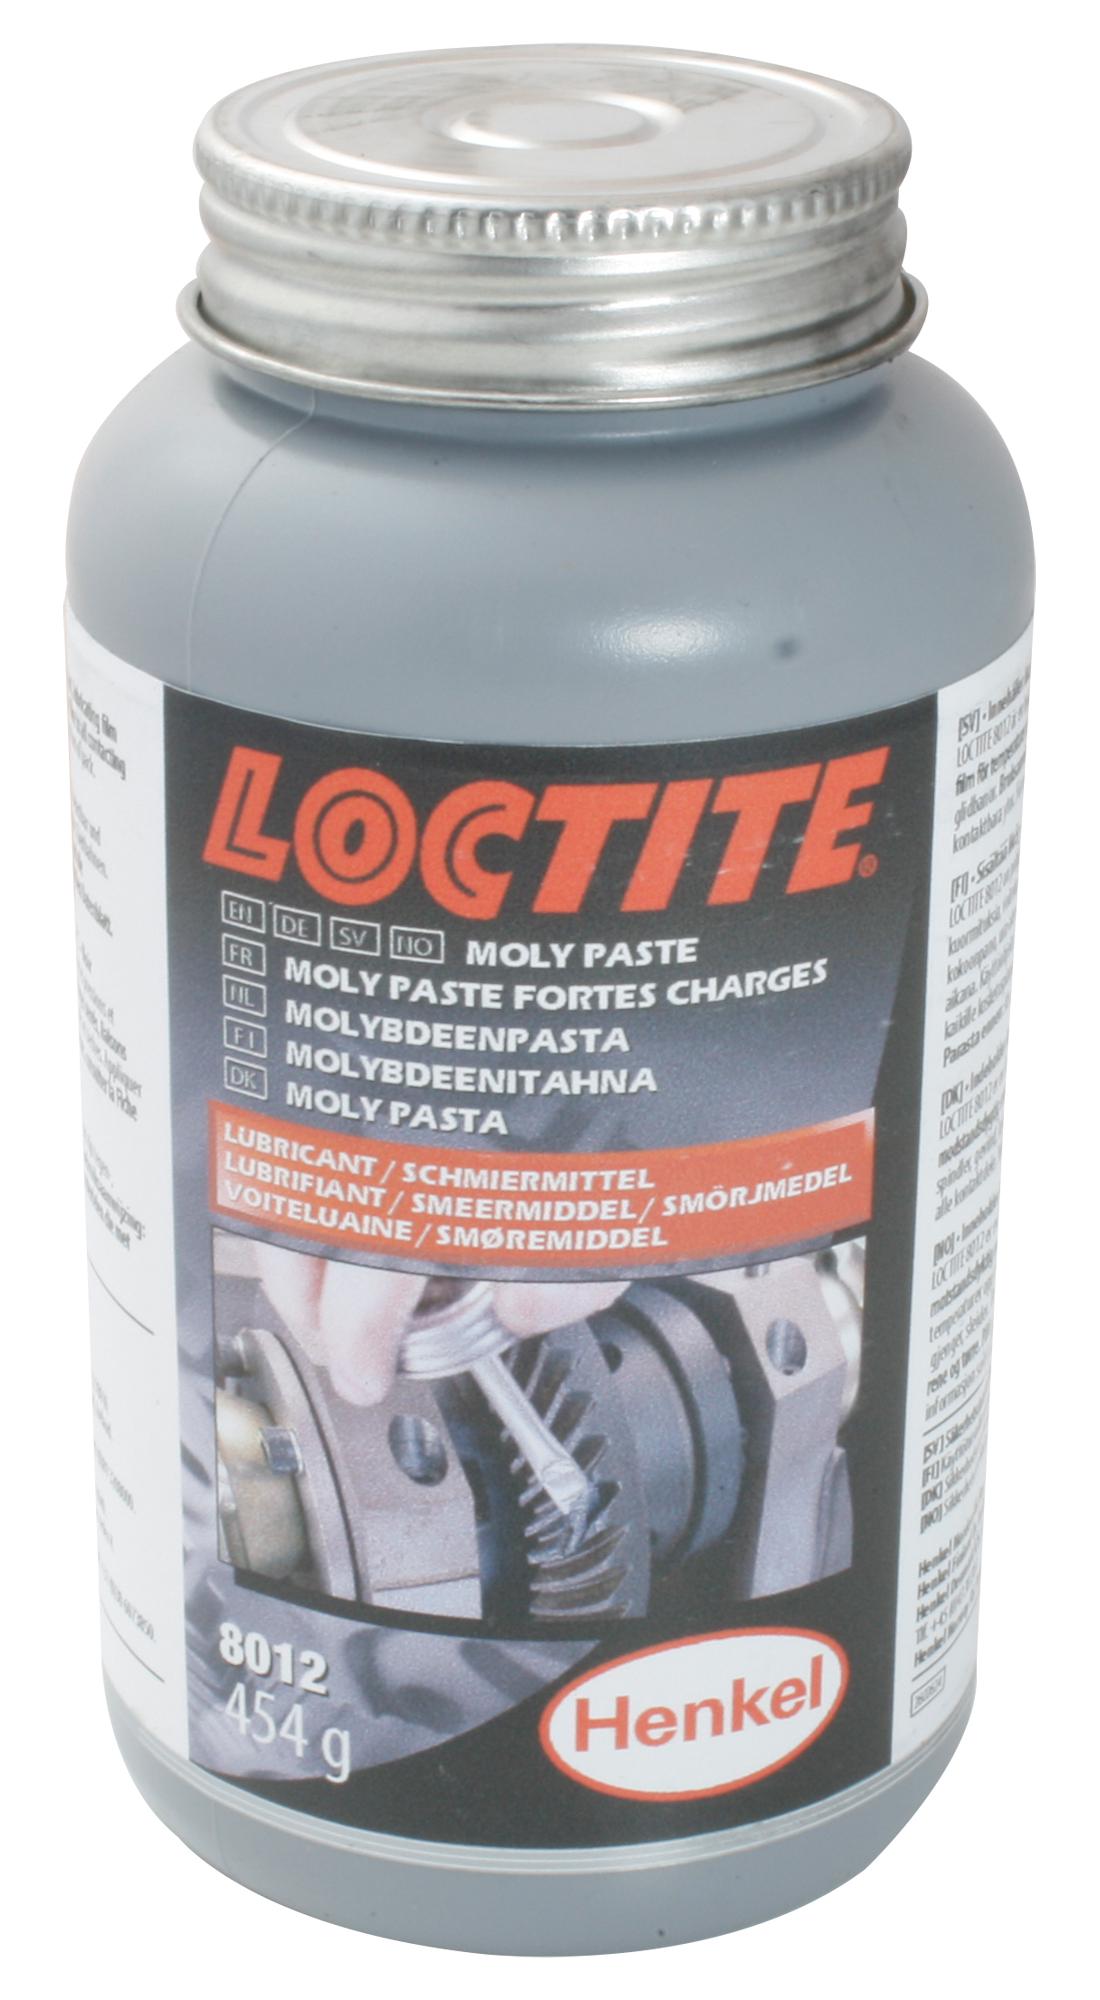 8012, 454G LUBRICANT, MOLY PASTE, 454G LOCTITE